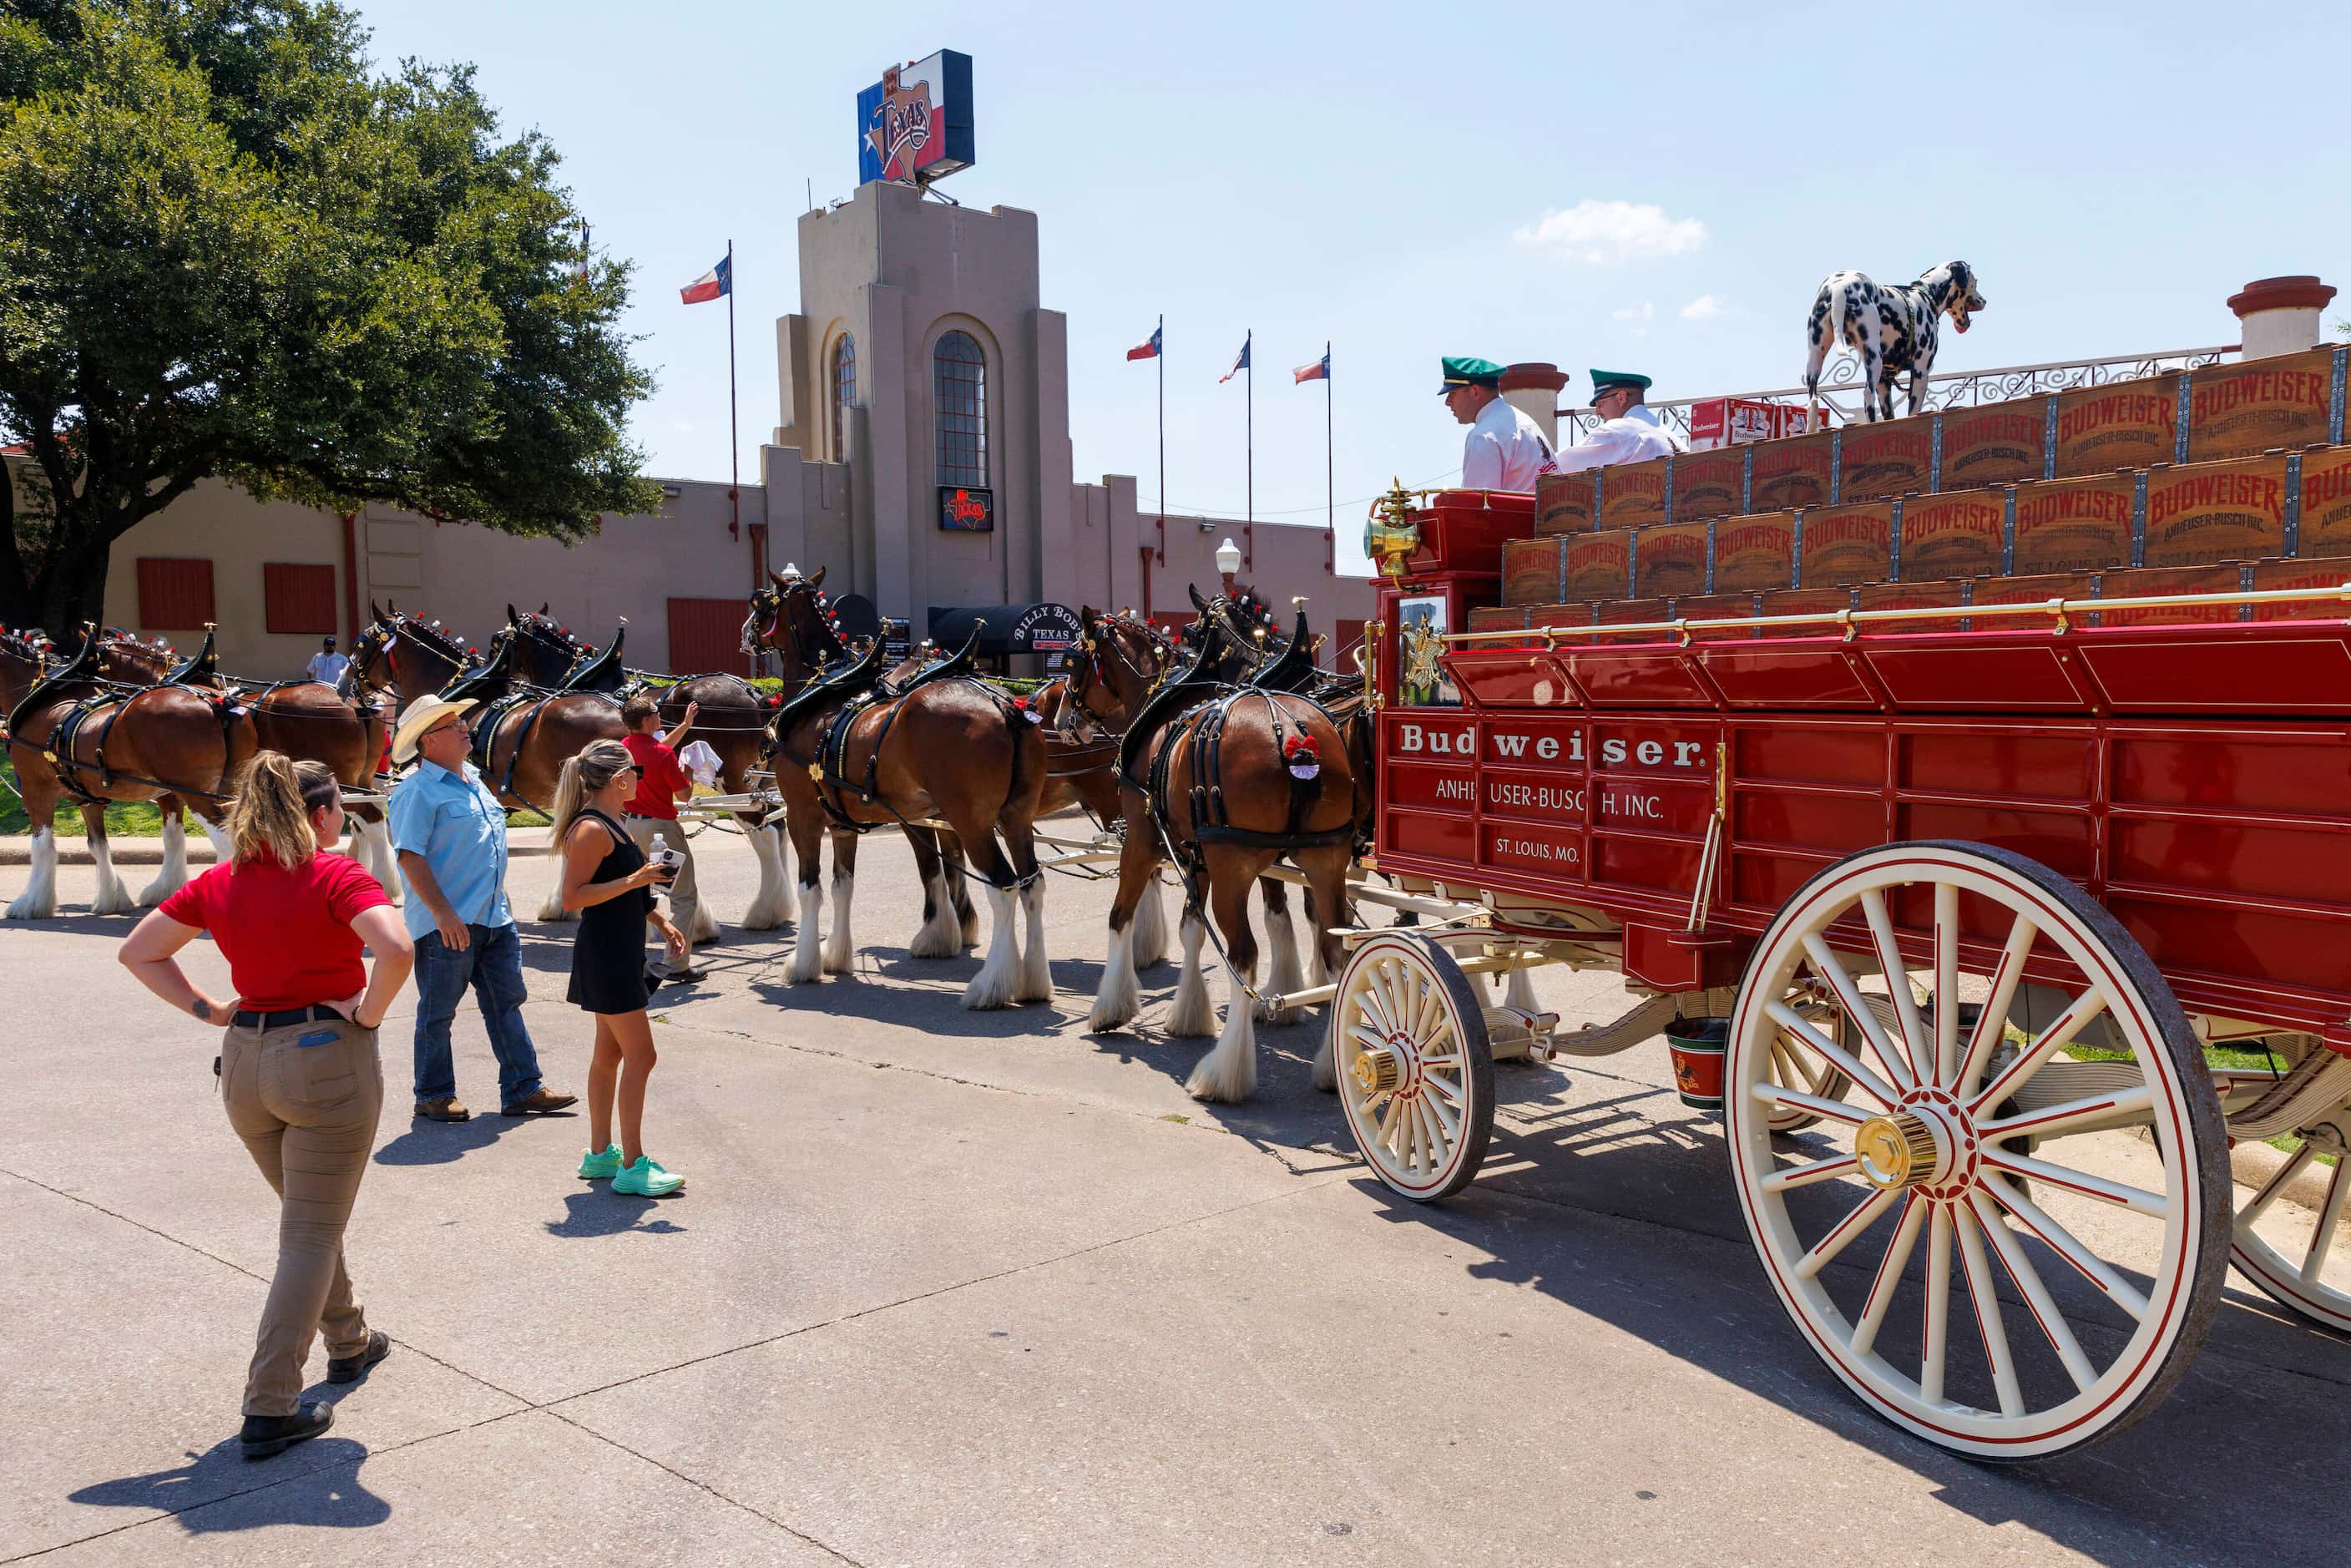 The Budweiser Clydesdales pull the beer wagon in front of Billy Bob’s Texas in The...